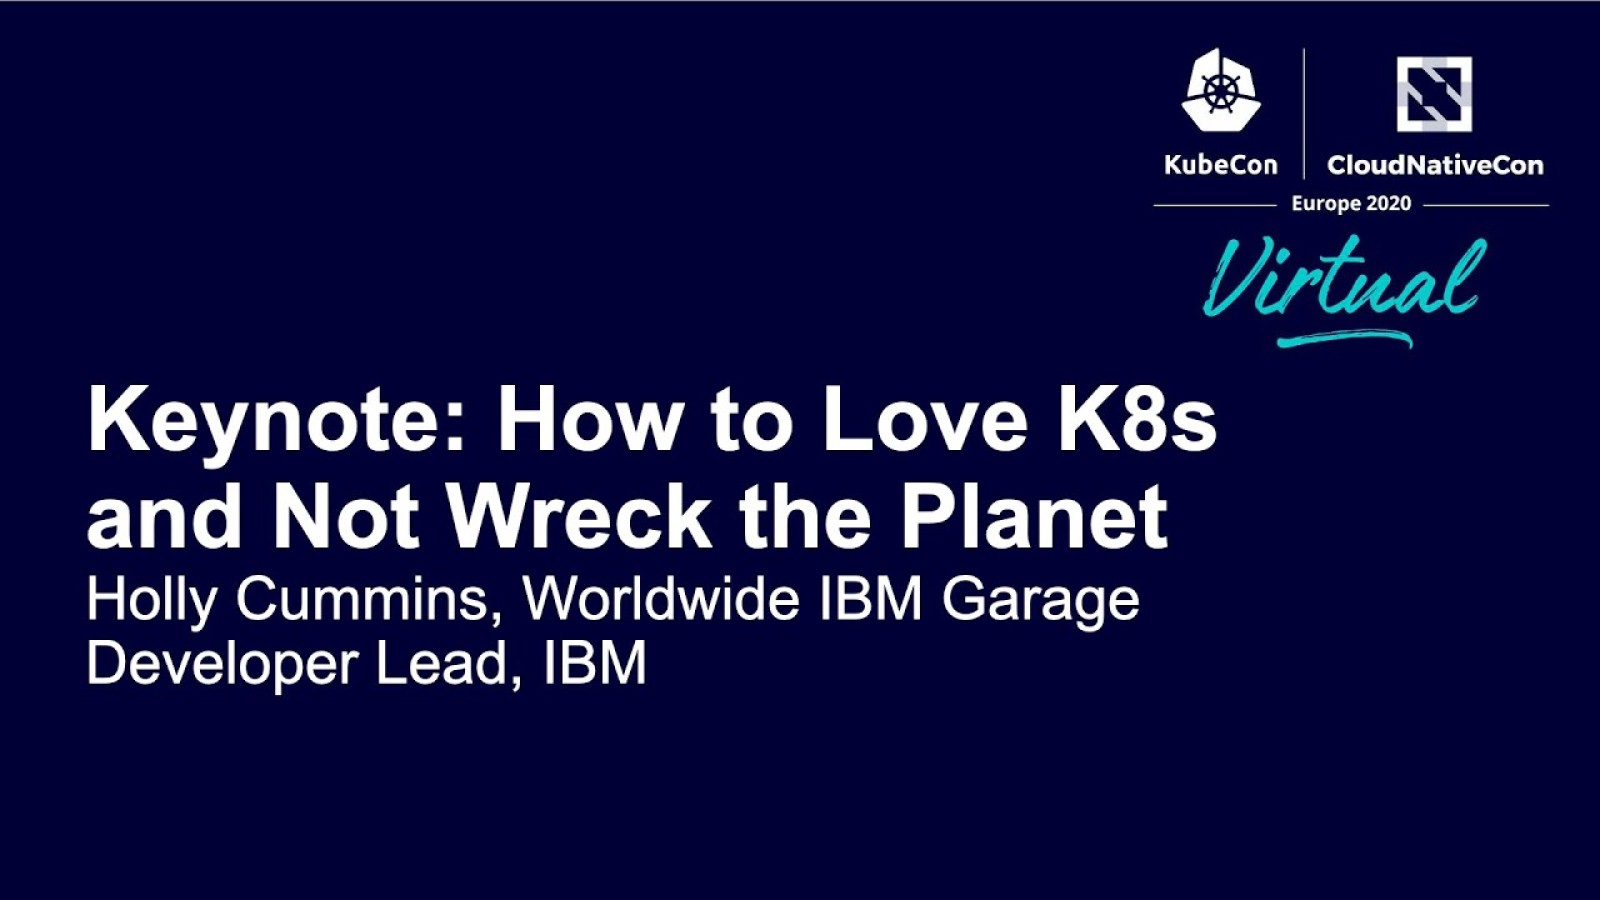 How to Love K8s and Not Wreck The Planet (keynote)